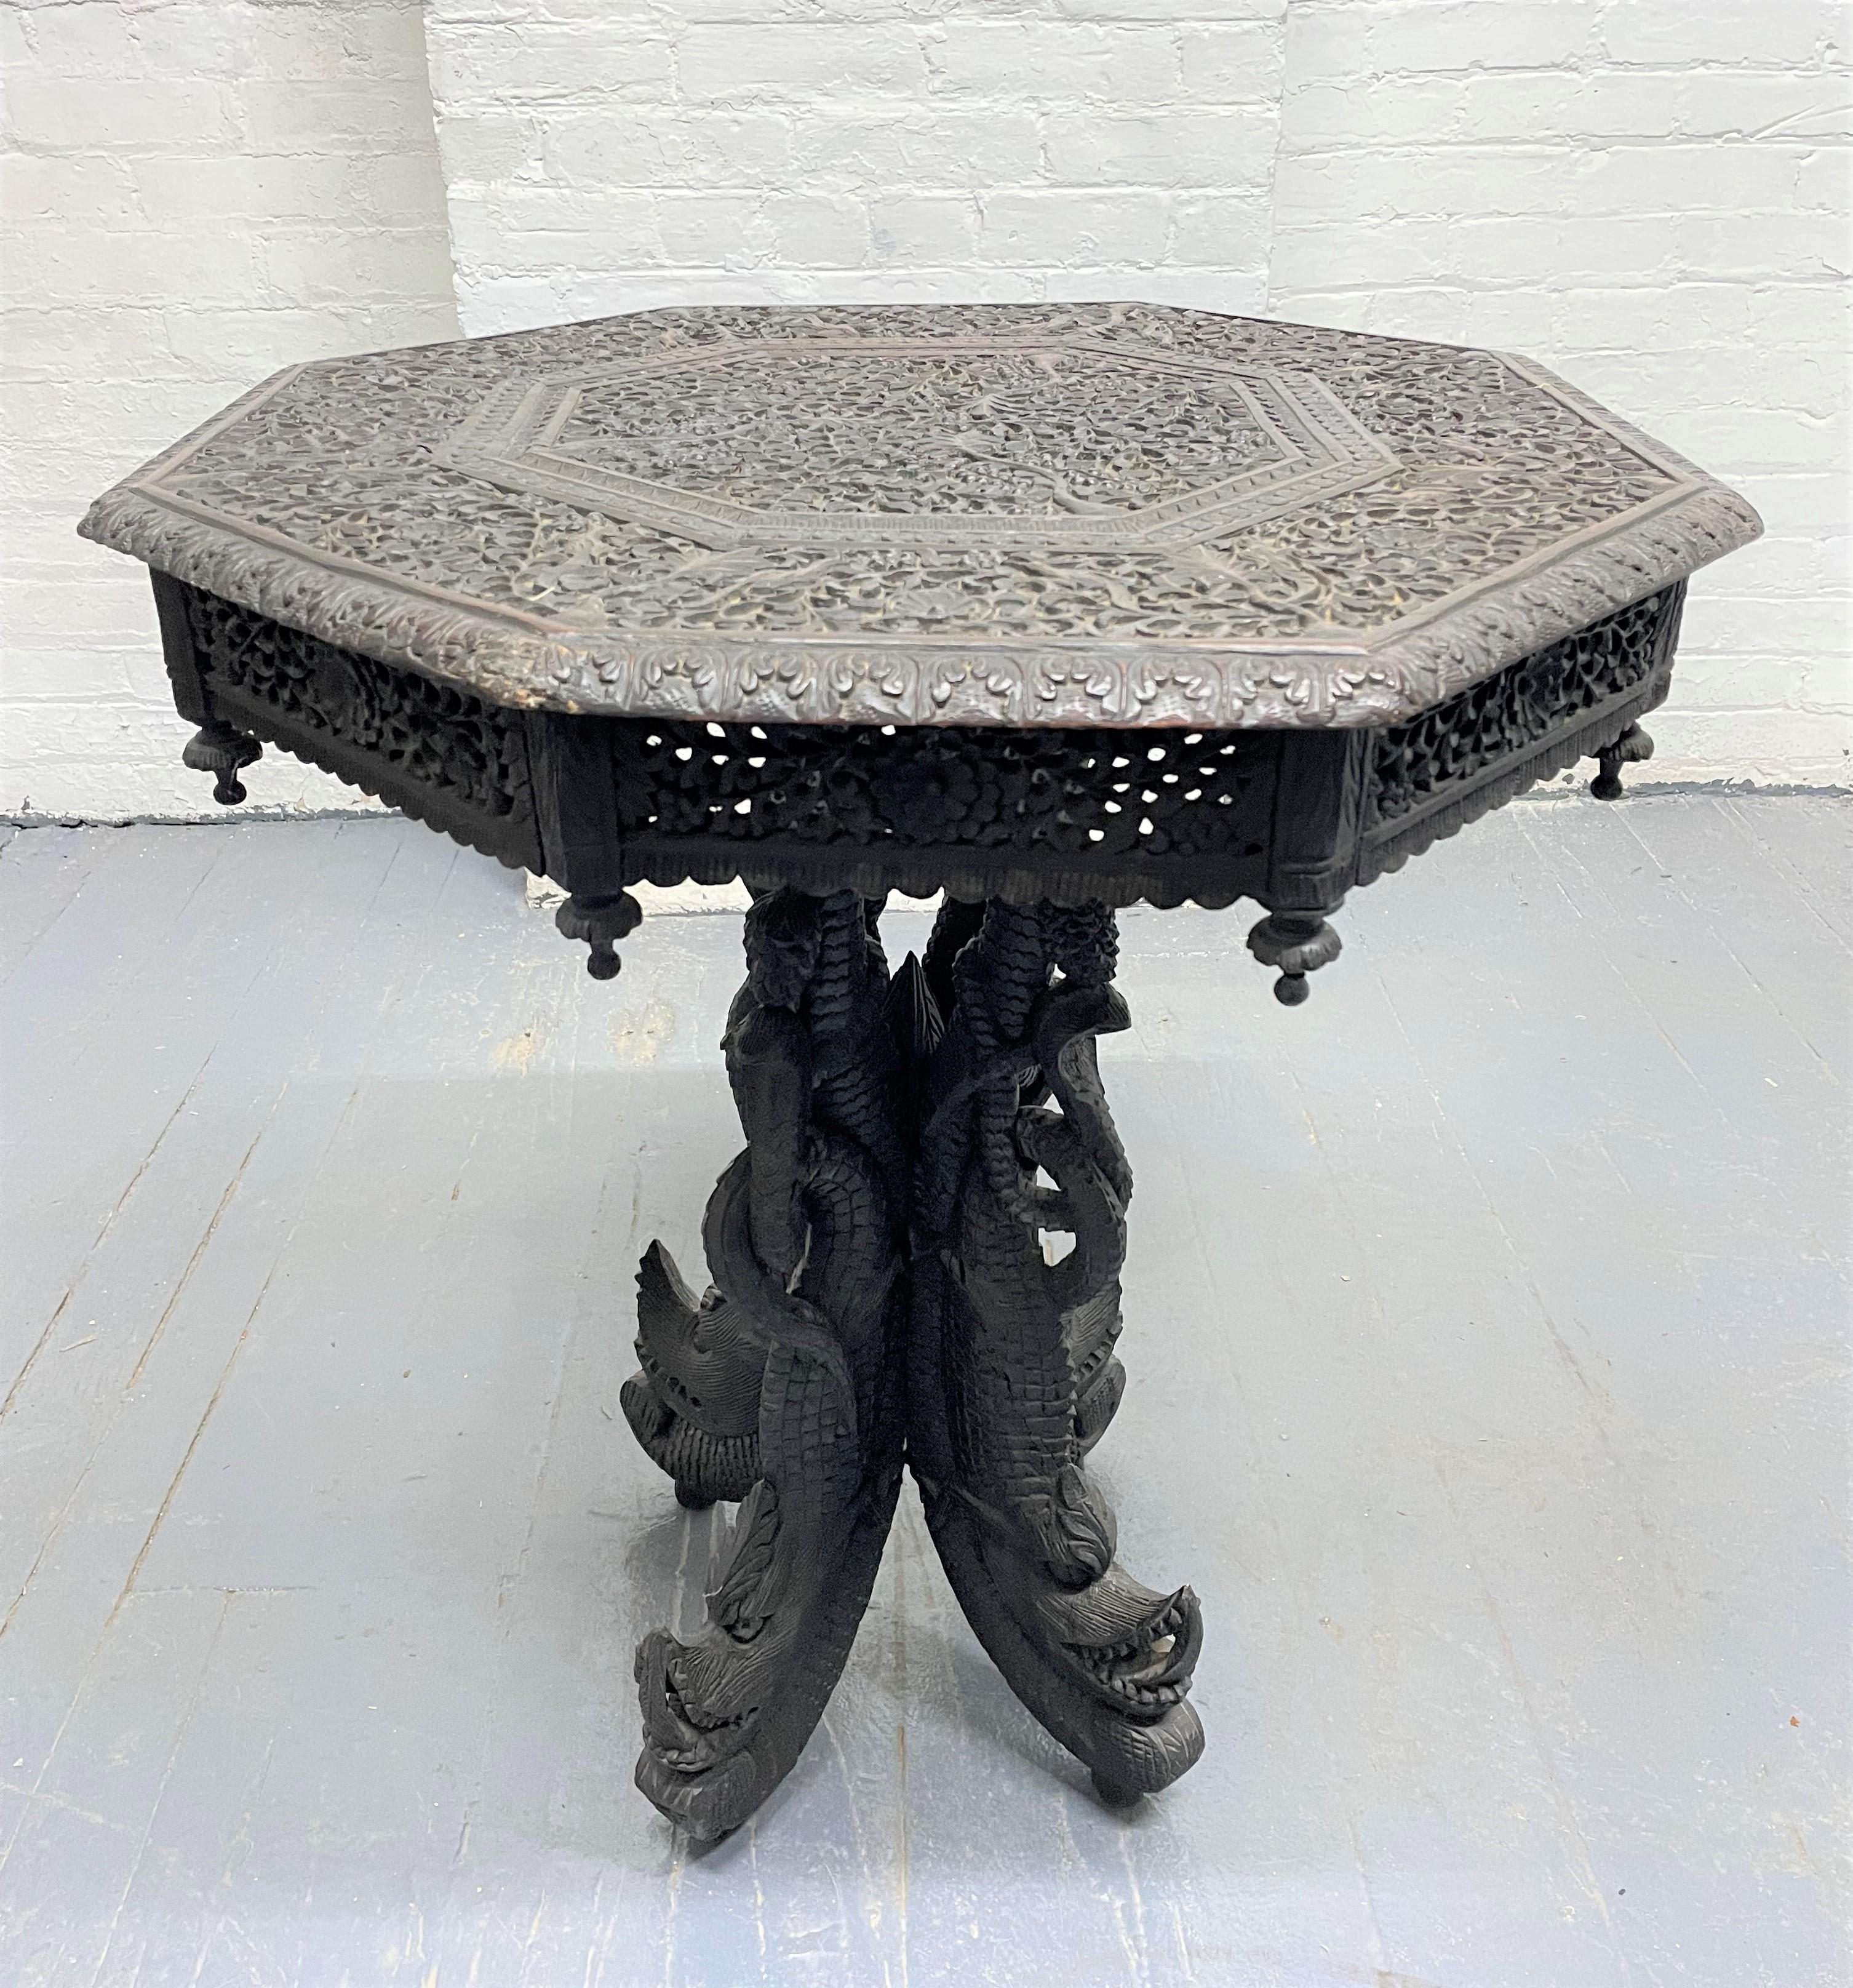 19th century Anglo-Indian carved wood table. The pedestal has rosewood carvings of rope and vine patterns and ravings of dragons.